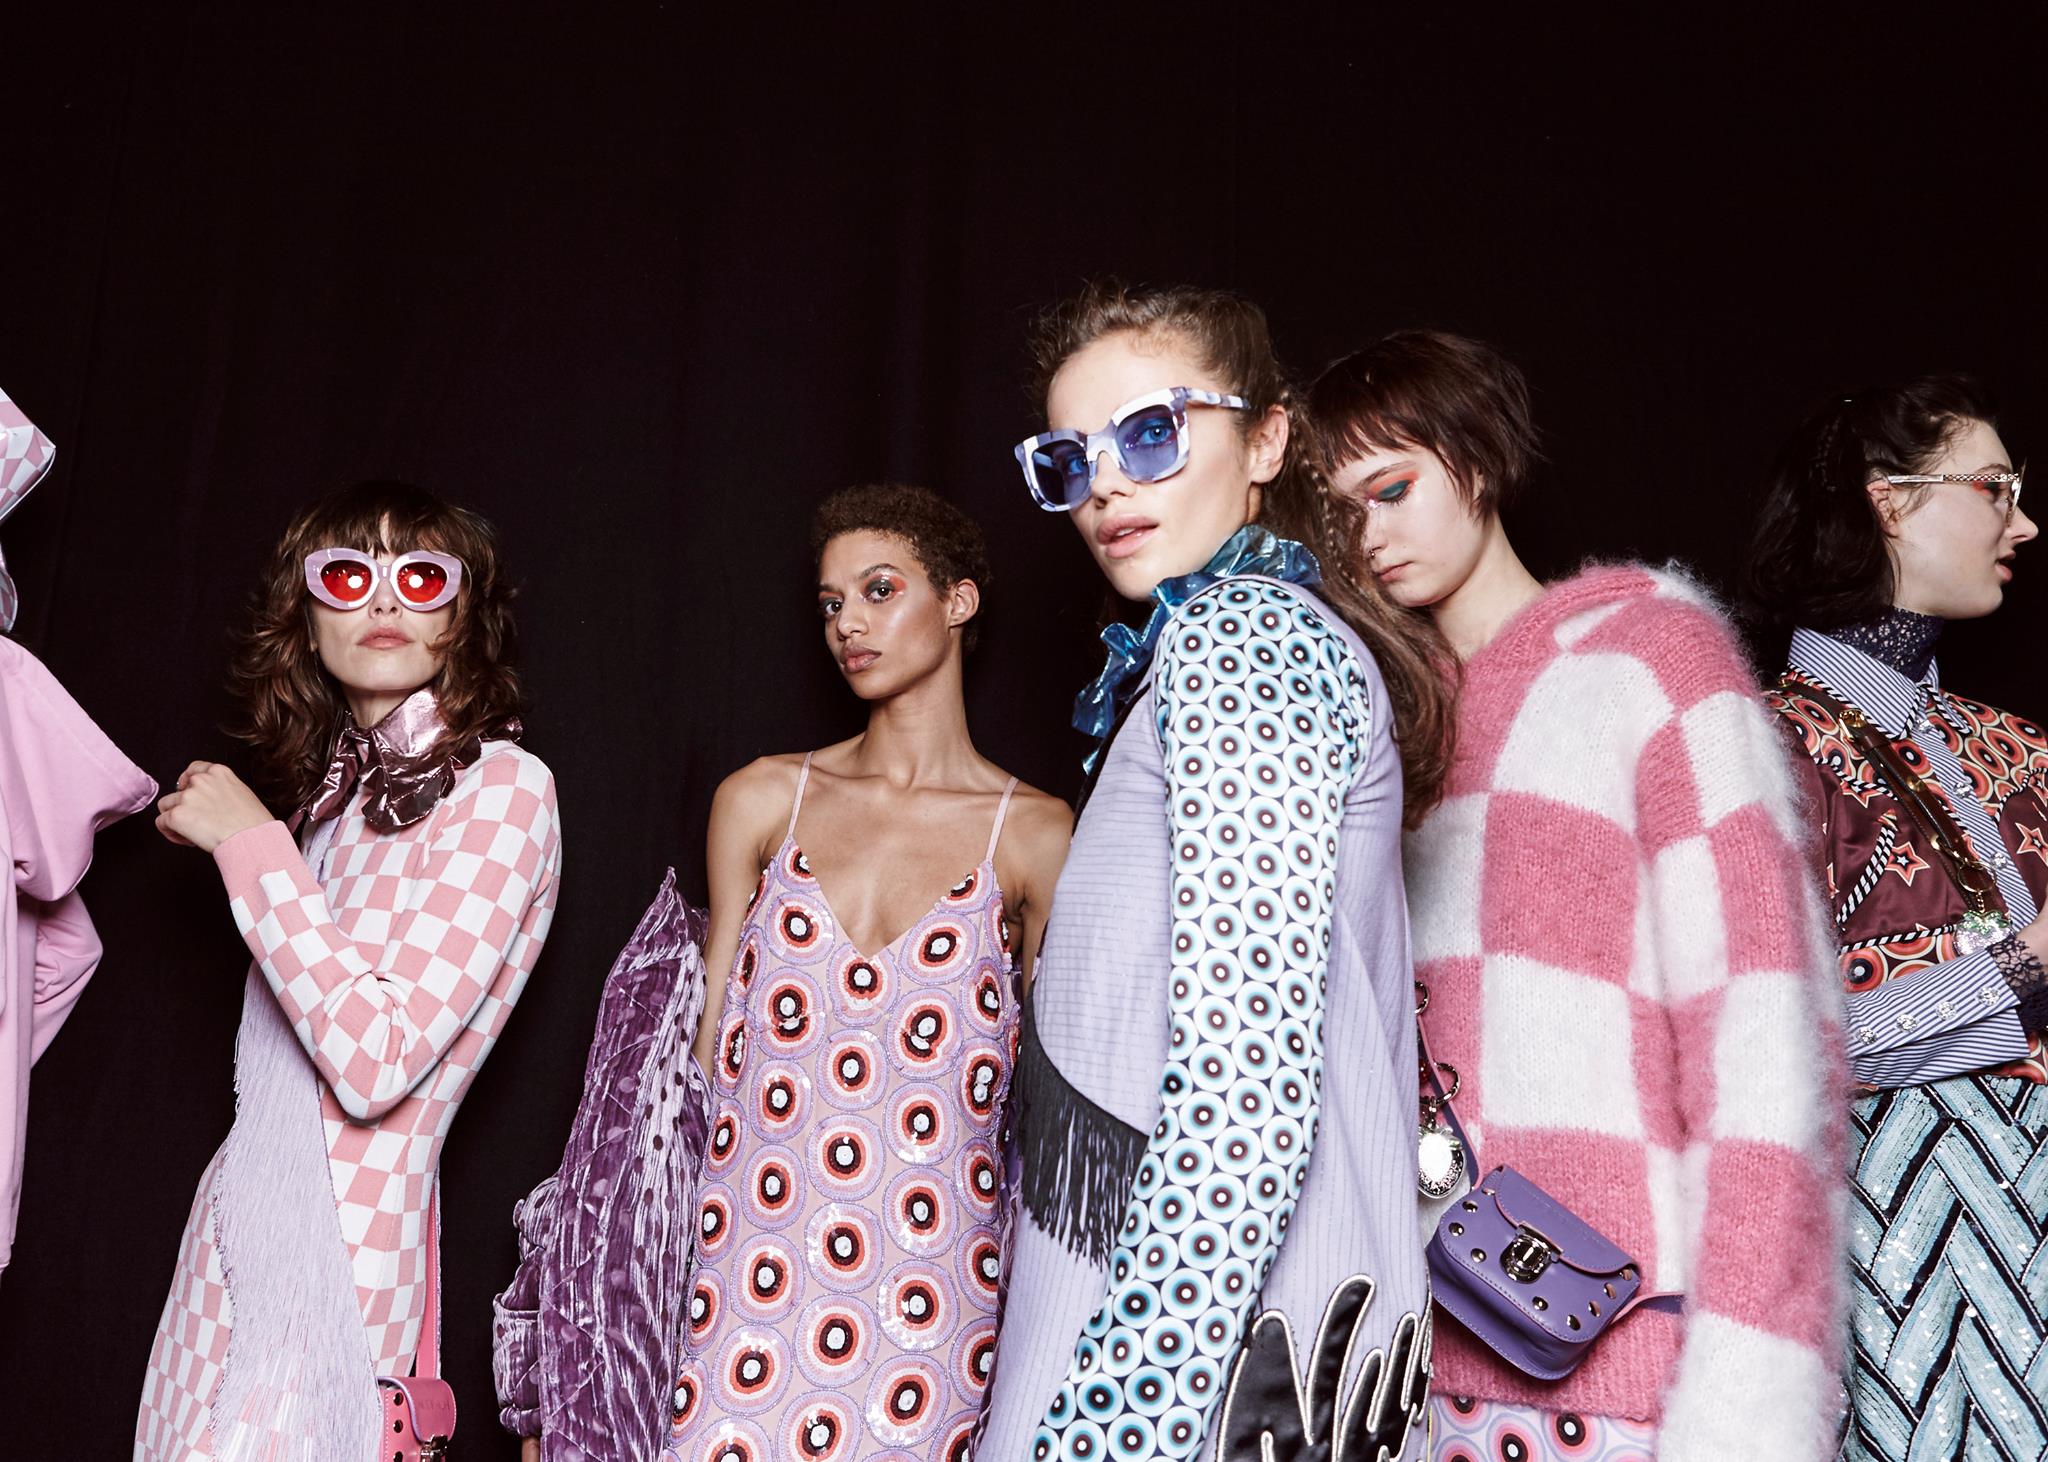 London Fashion Week September 2017 Schedule - What to Expect